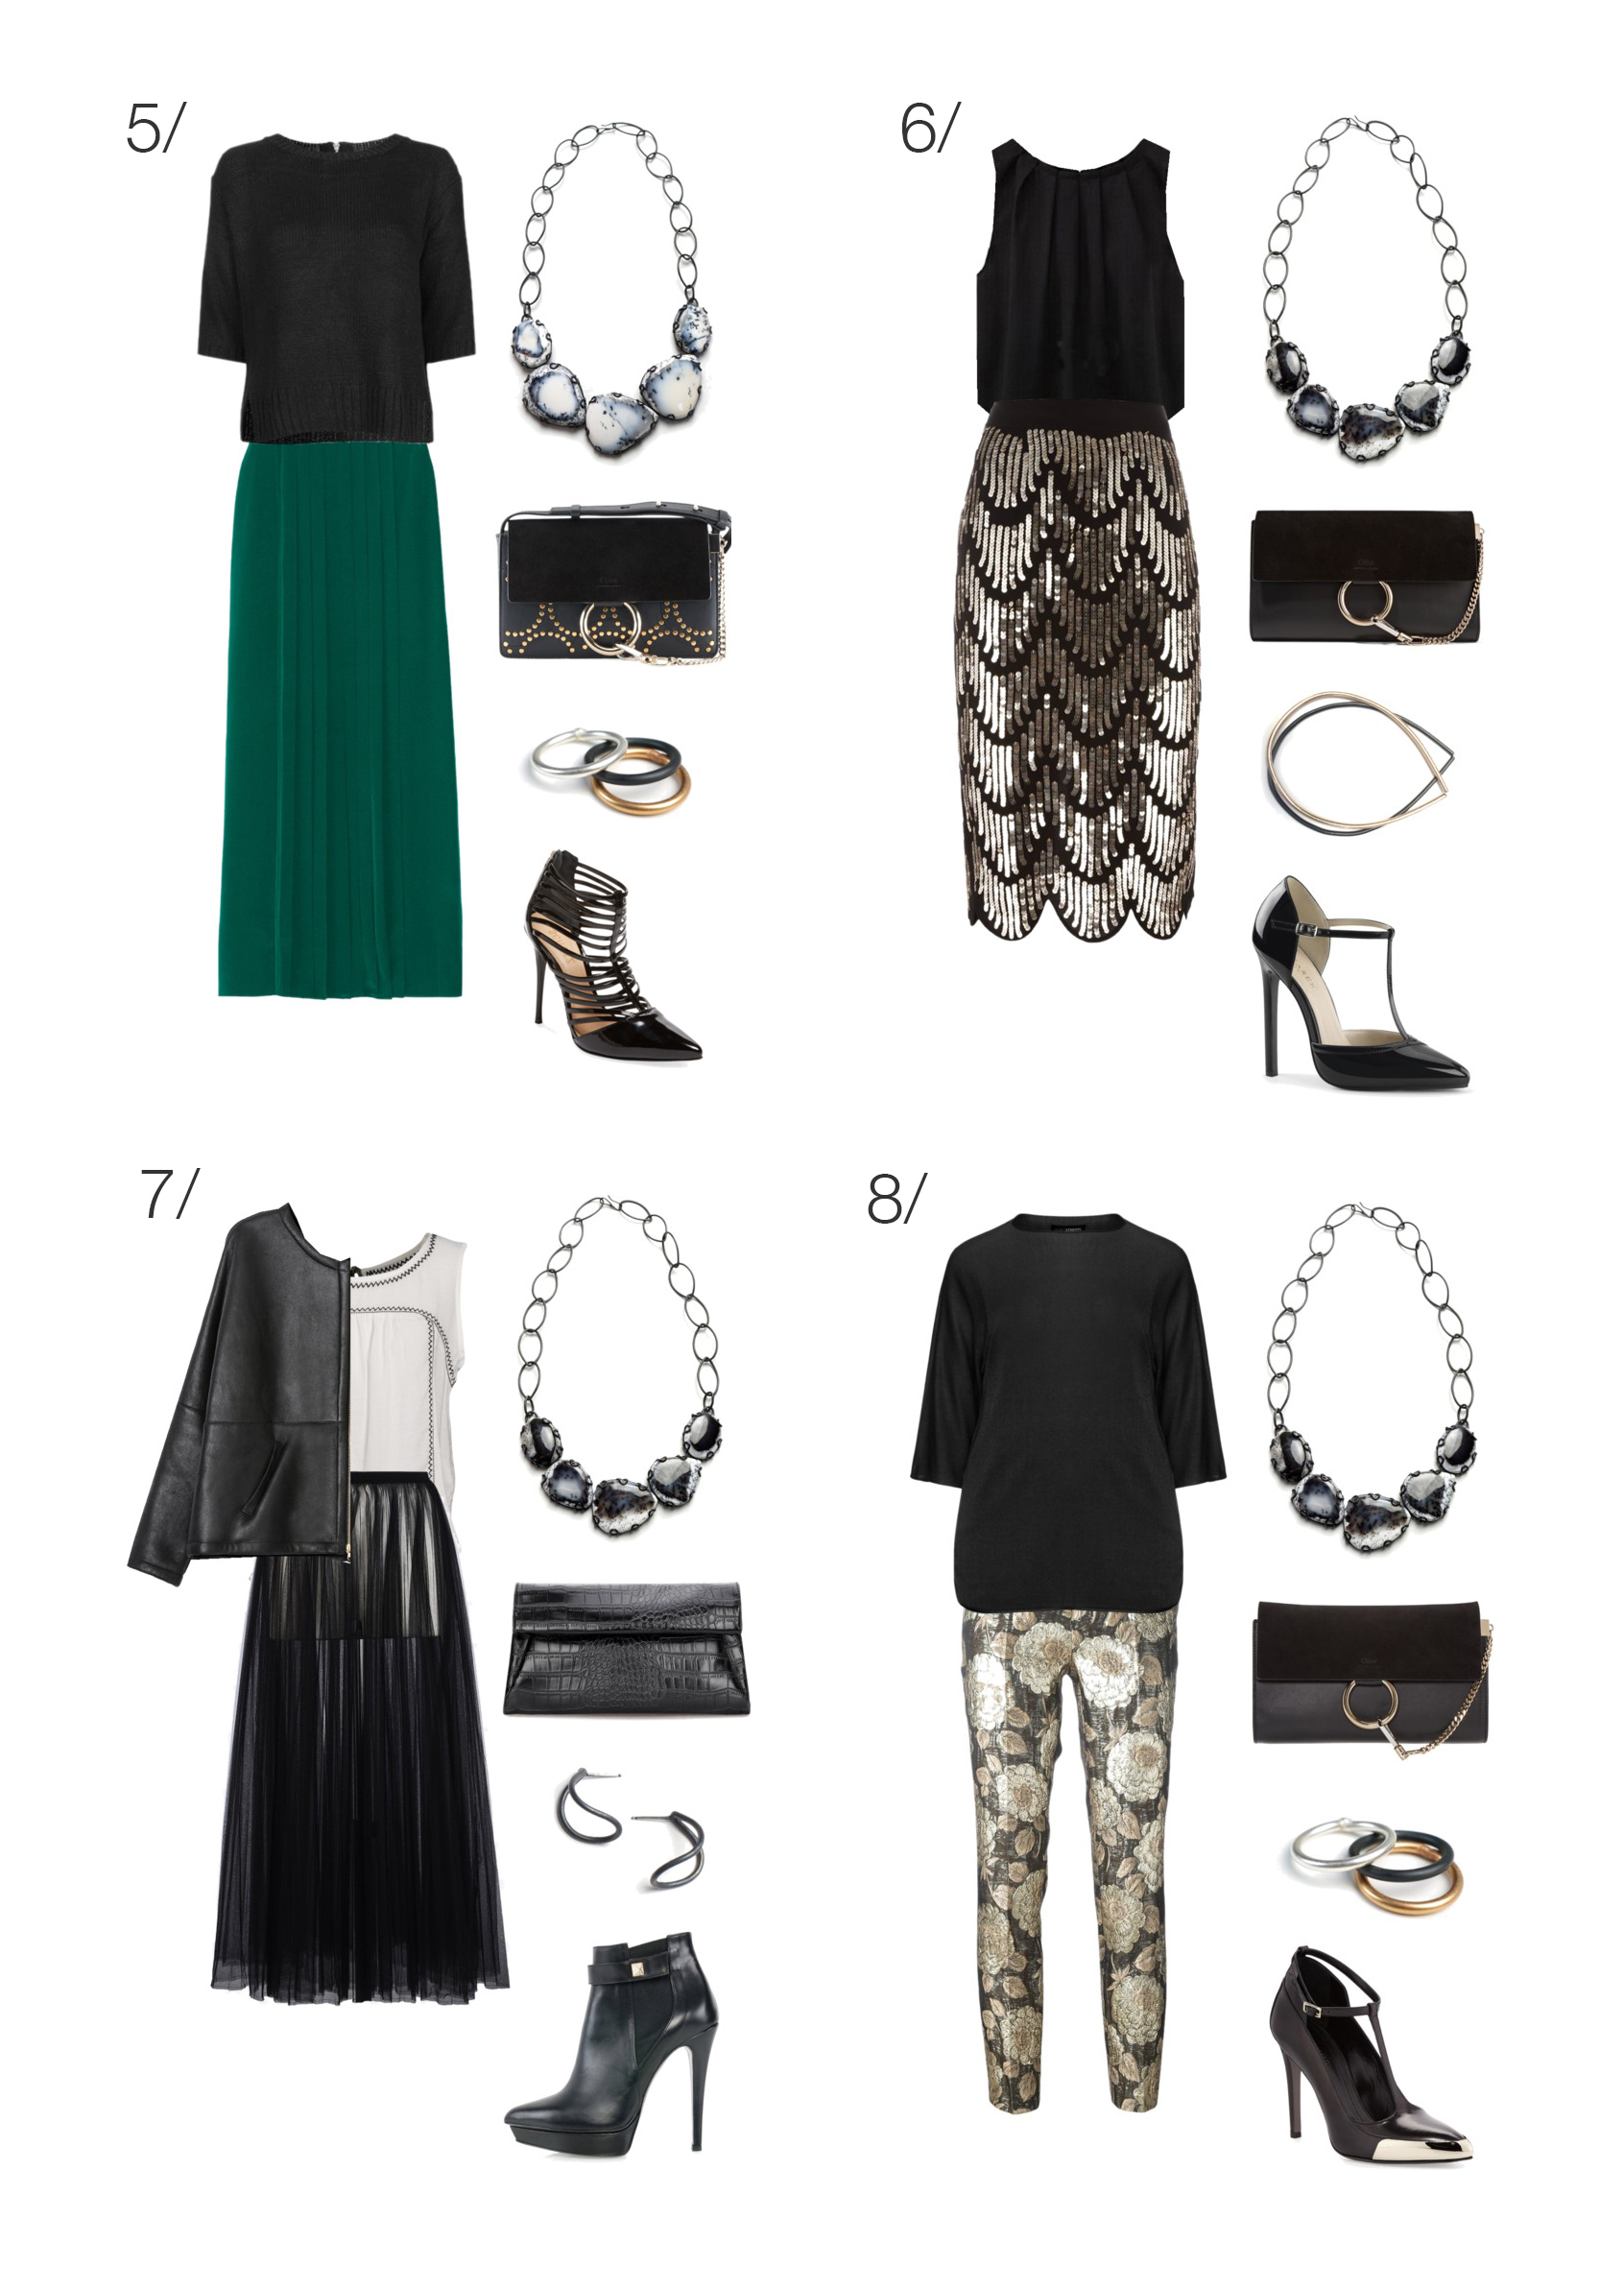 From the office Christmas party to New Year's Eve, these eight outfits are perfect for your next holiday party. // Click for outfit details.